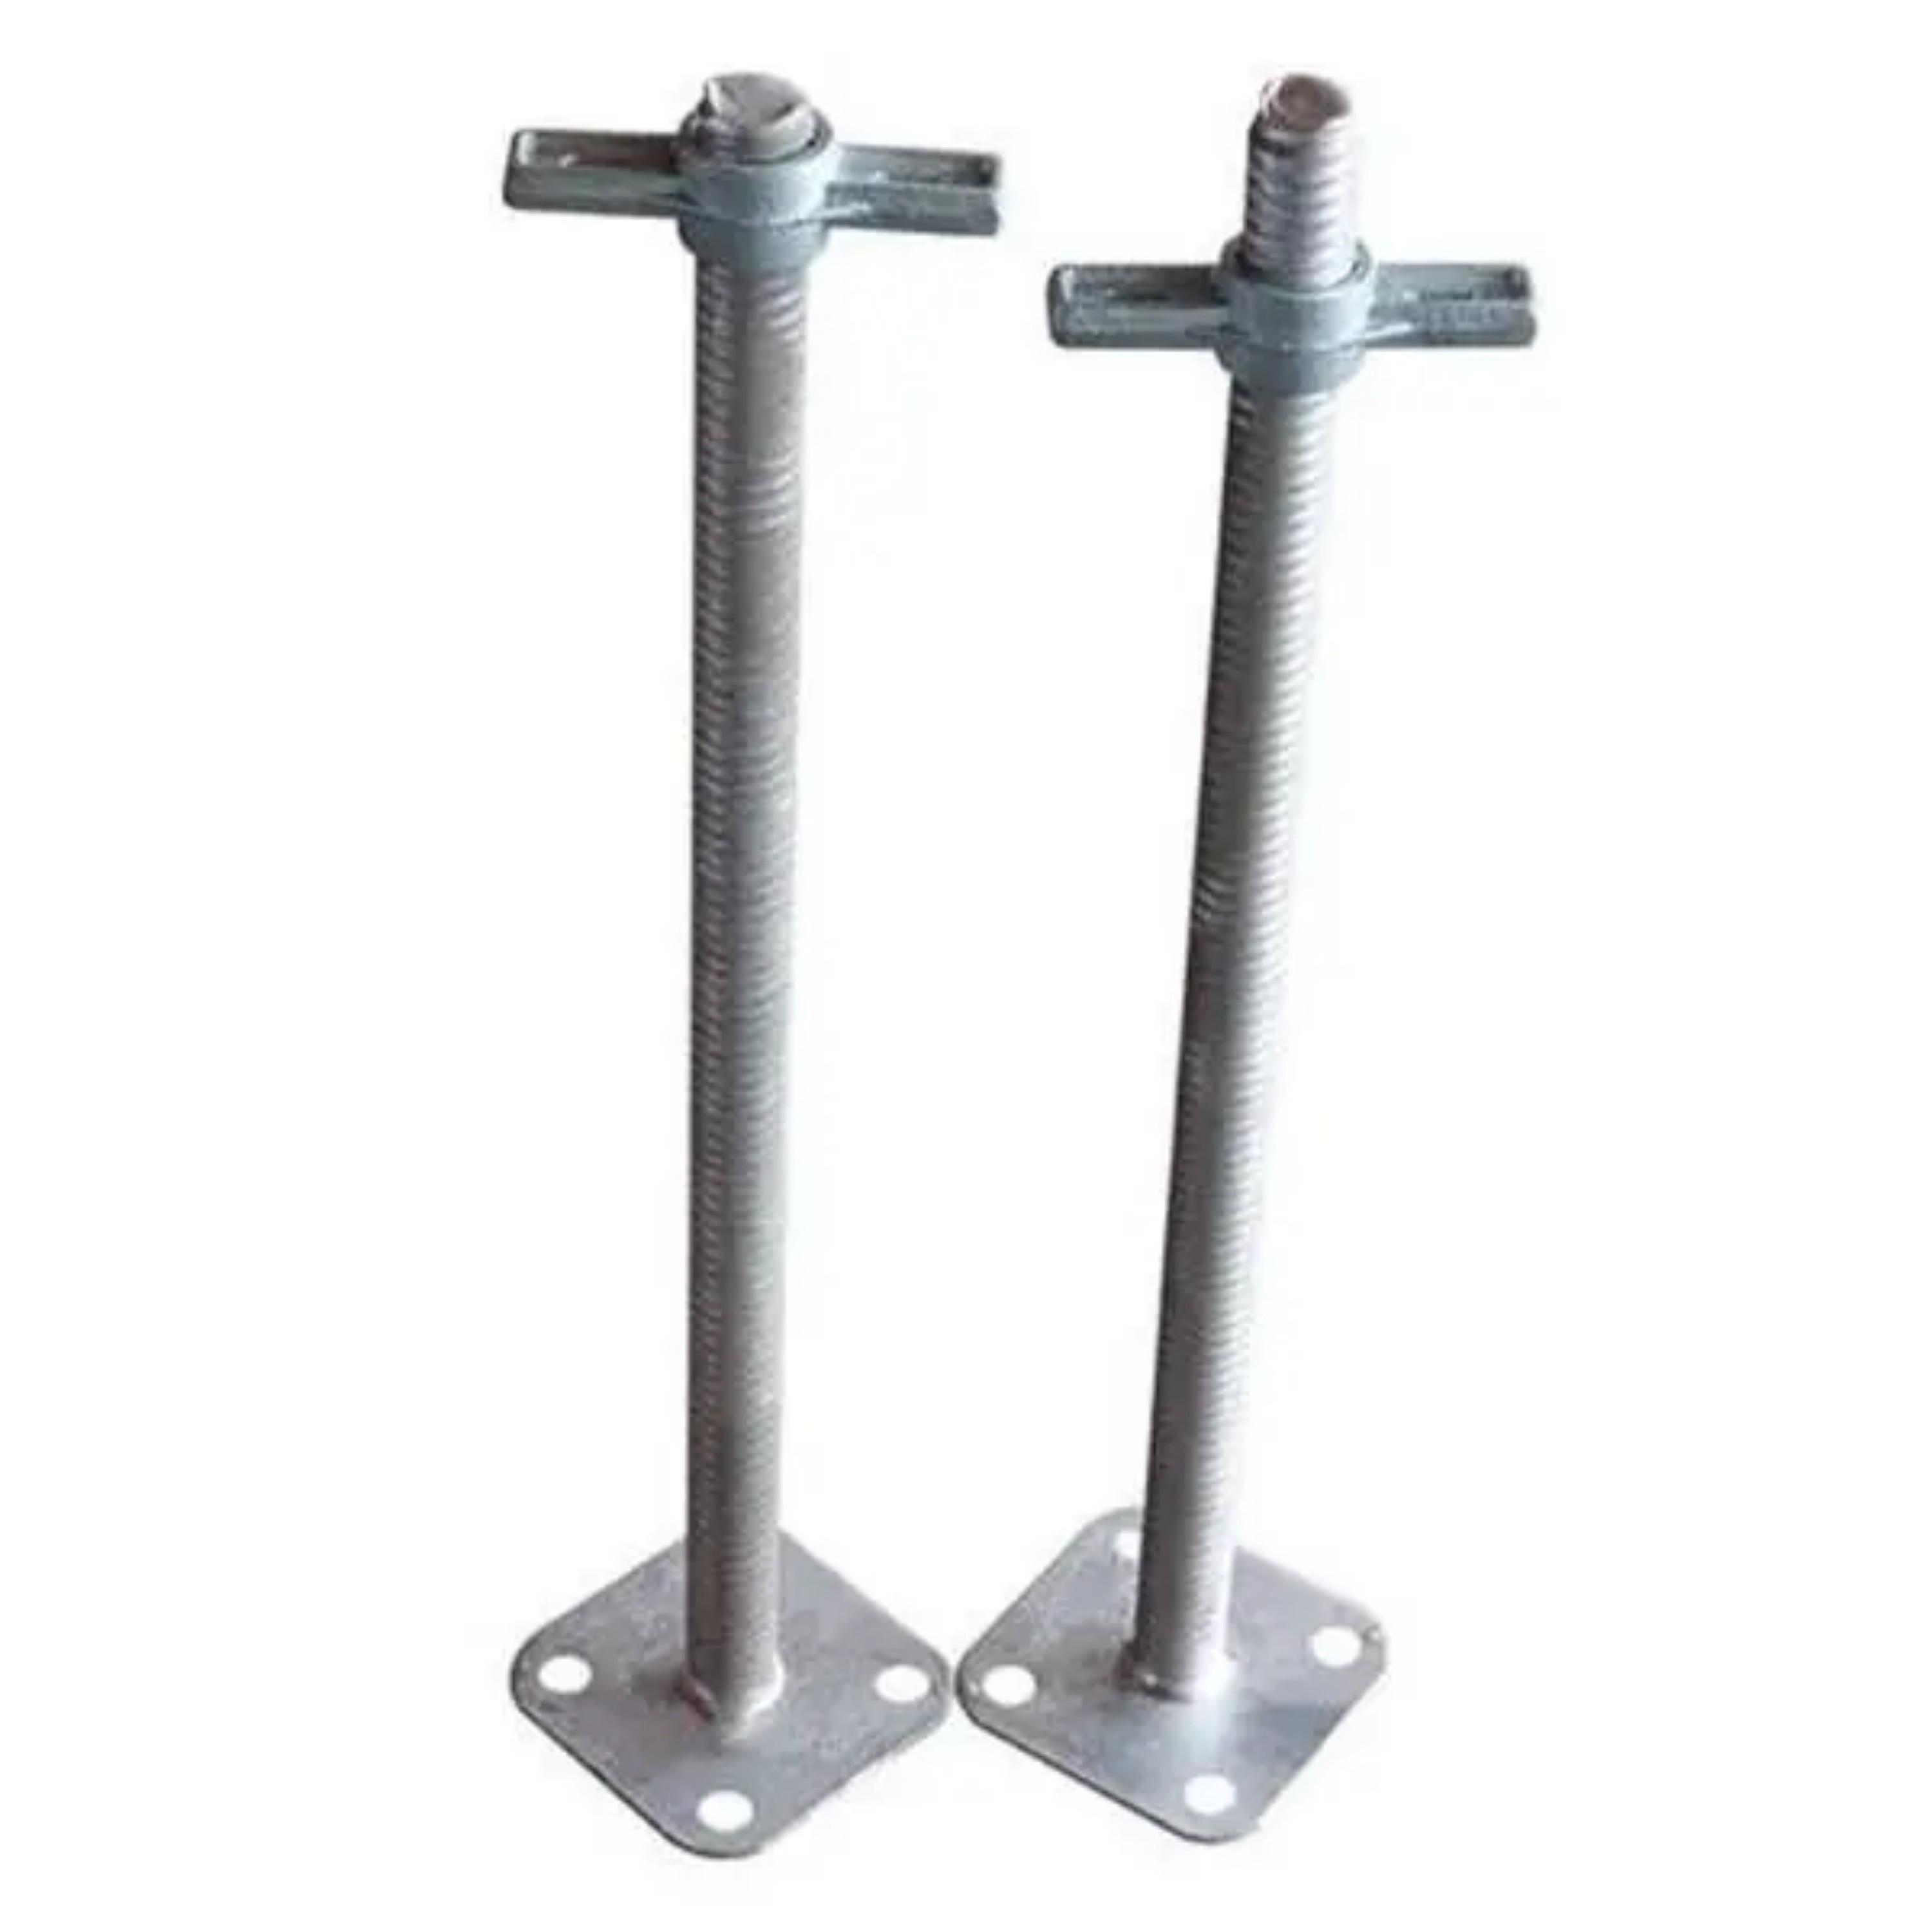 Buy Scaffolding Jack Base 450 - 600 mm online at best rates in India